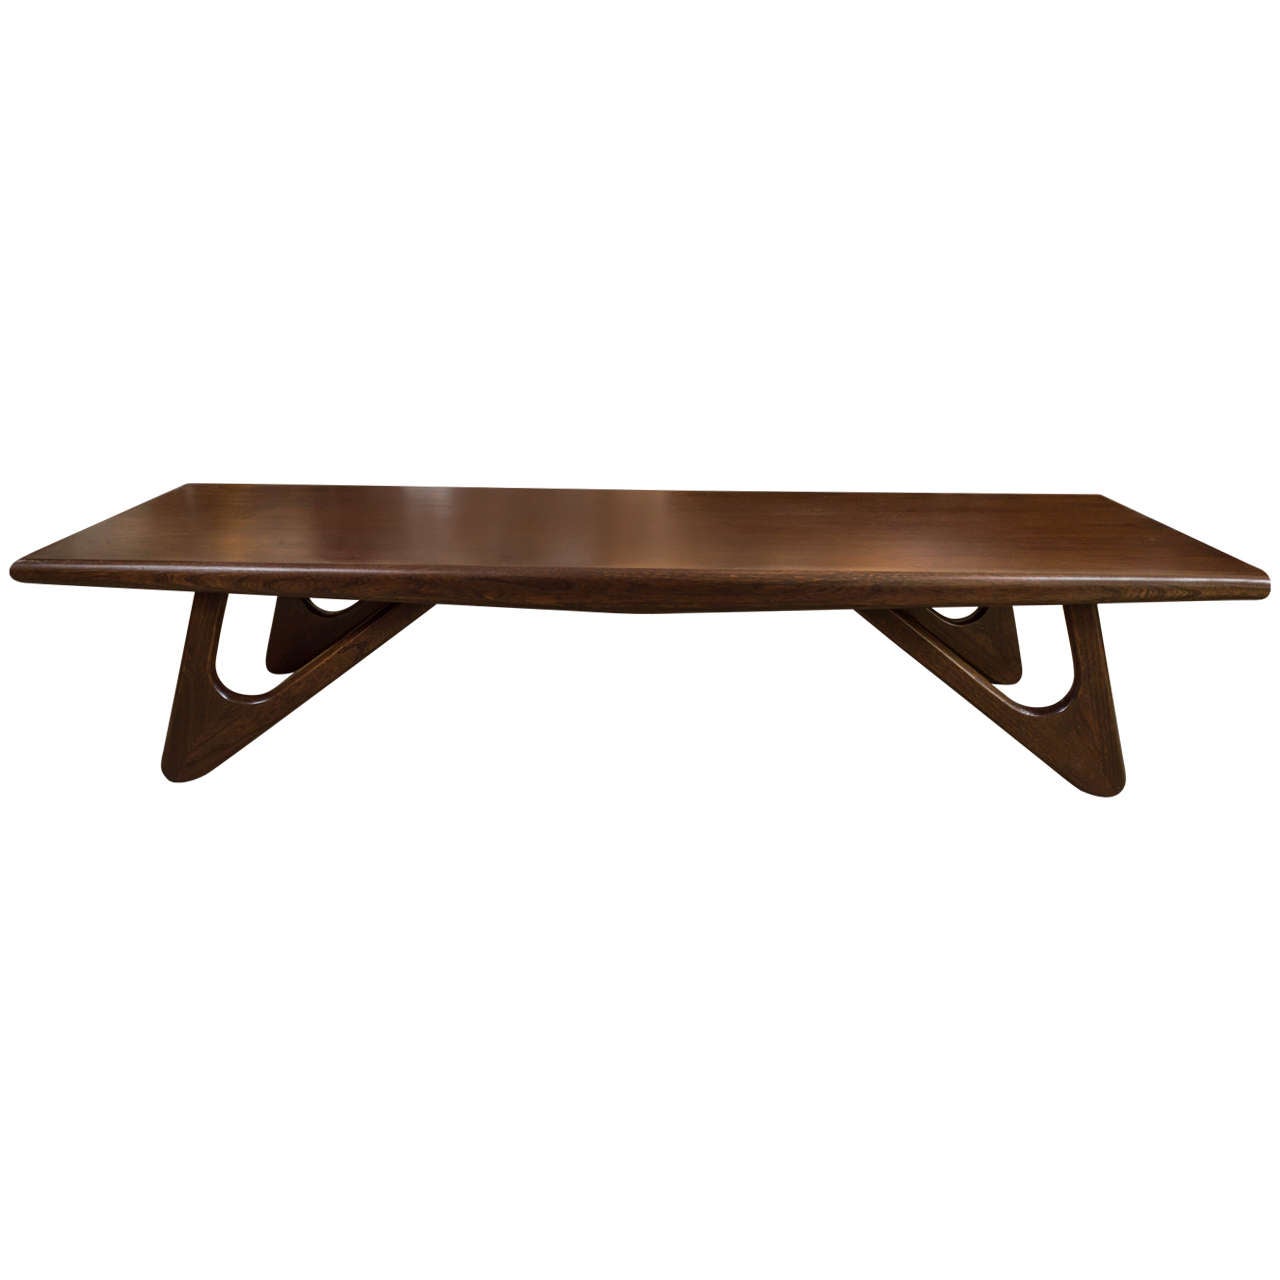 1950s Walnut Coffee Table In The Style Of Adrian Pearsall